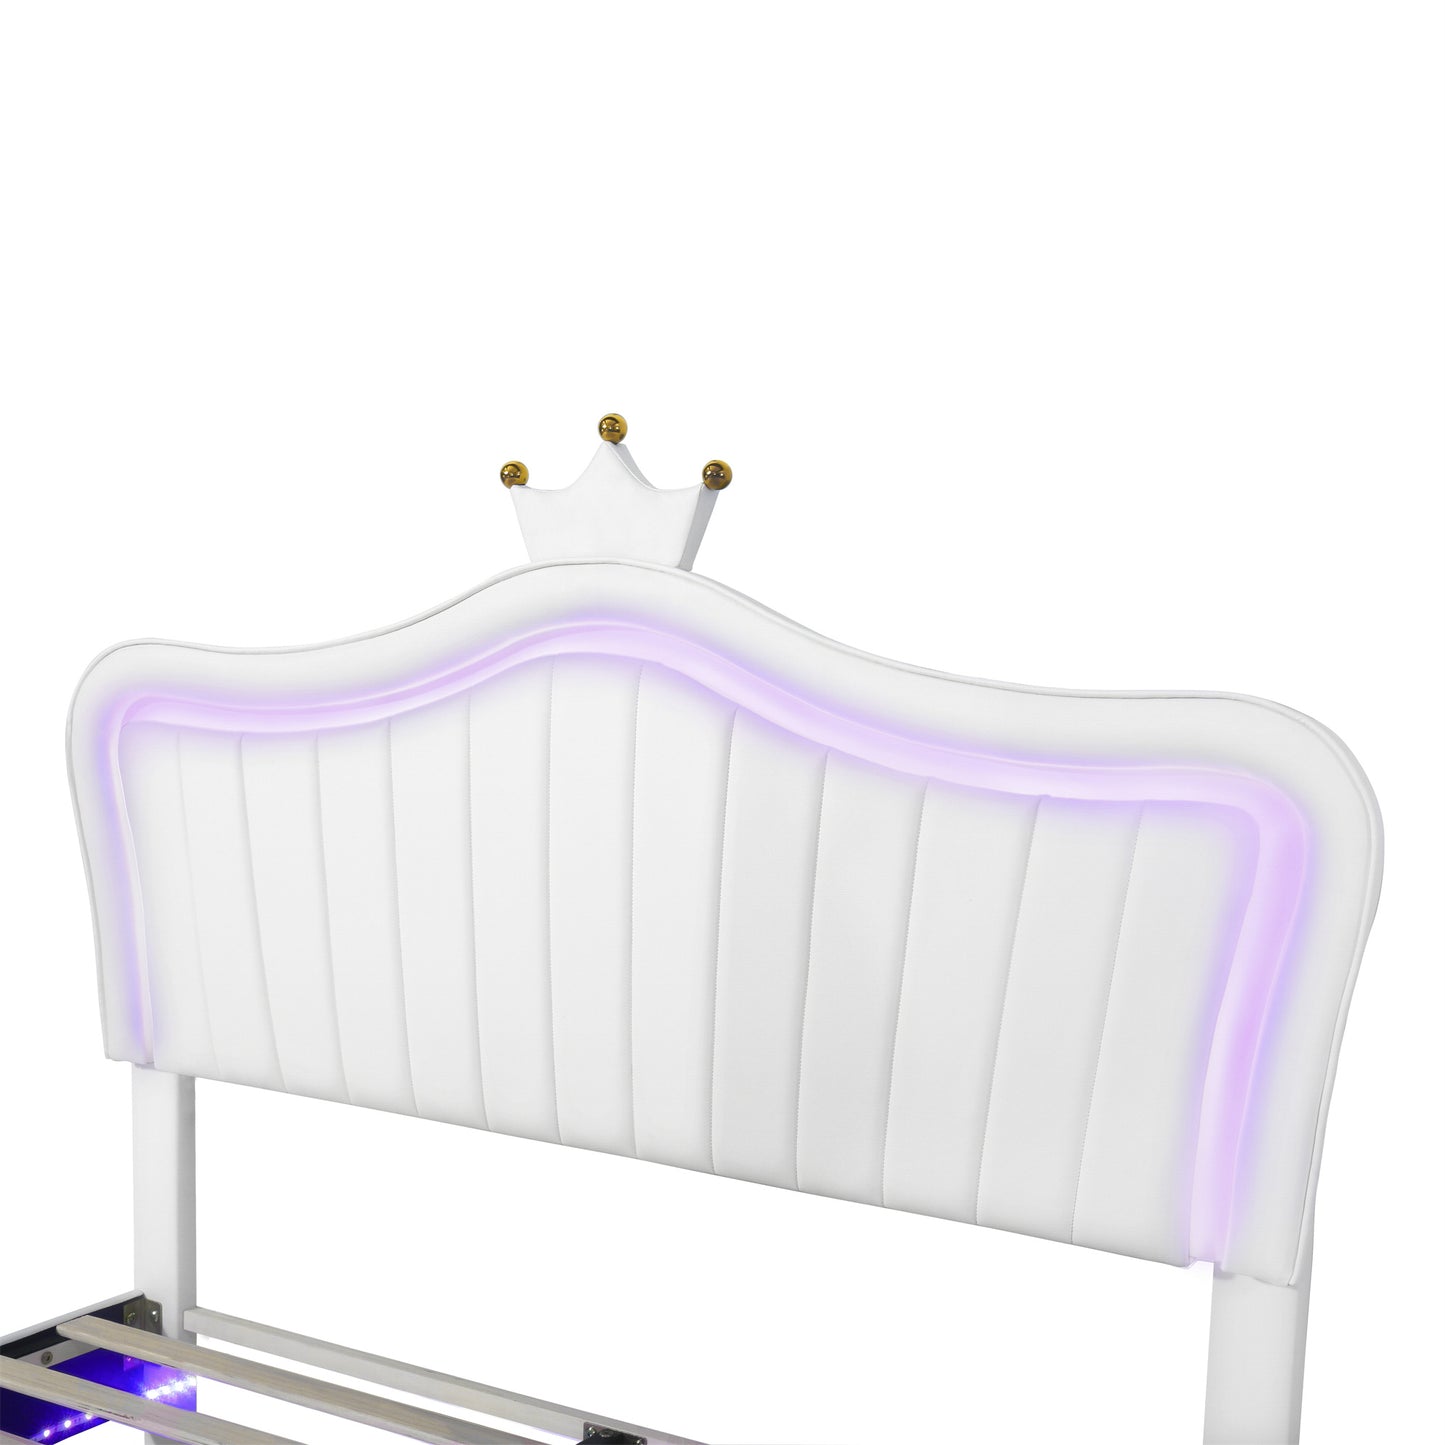 modern upholstered princess bed with crown headboard and led lights, white